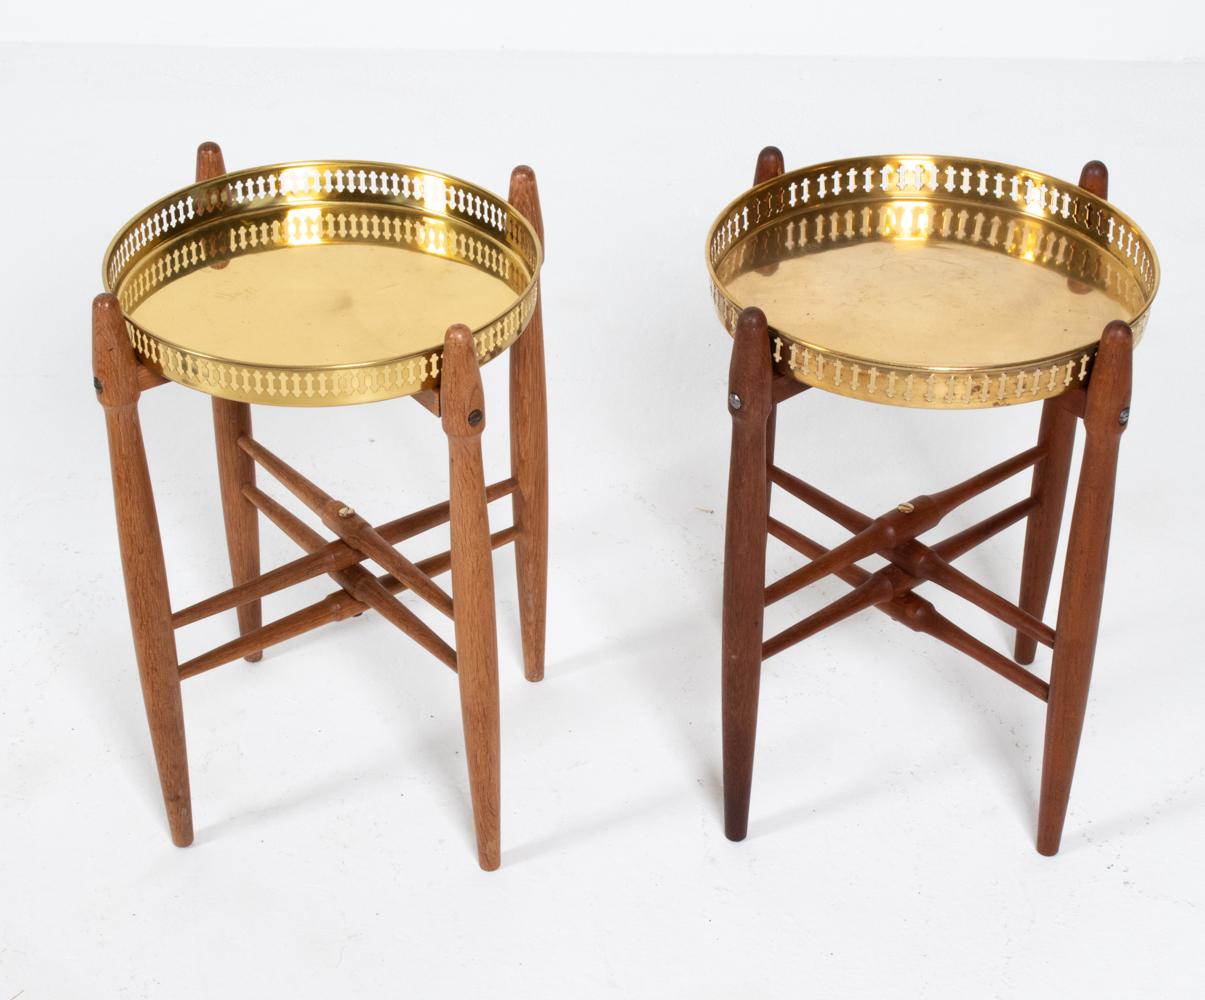 A fabulous matched pair of Danish mid-century side tables, one in lighter oak wood, one in slightly darker teak, both with pierced galleried brass tray tops, designed by Poul Hundevad. Classic Scandinavian modern design, reflected in the tapered,